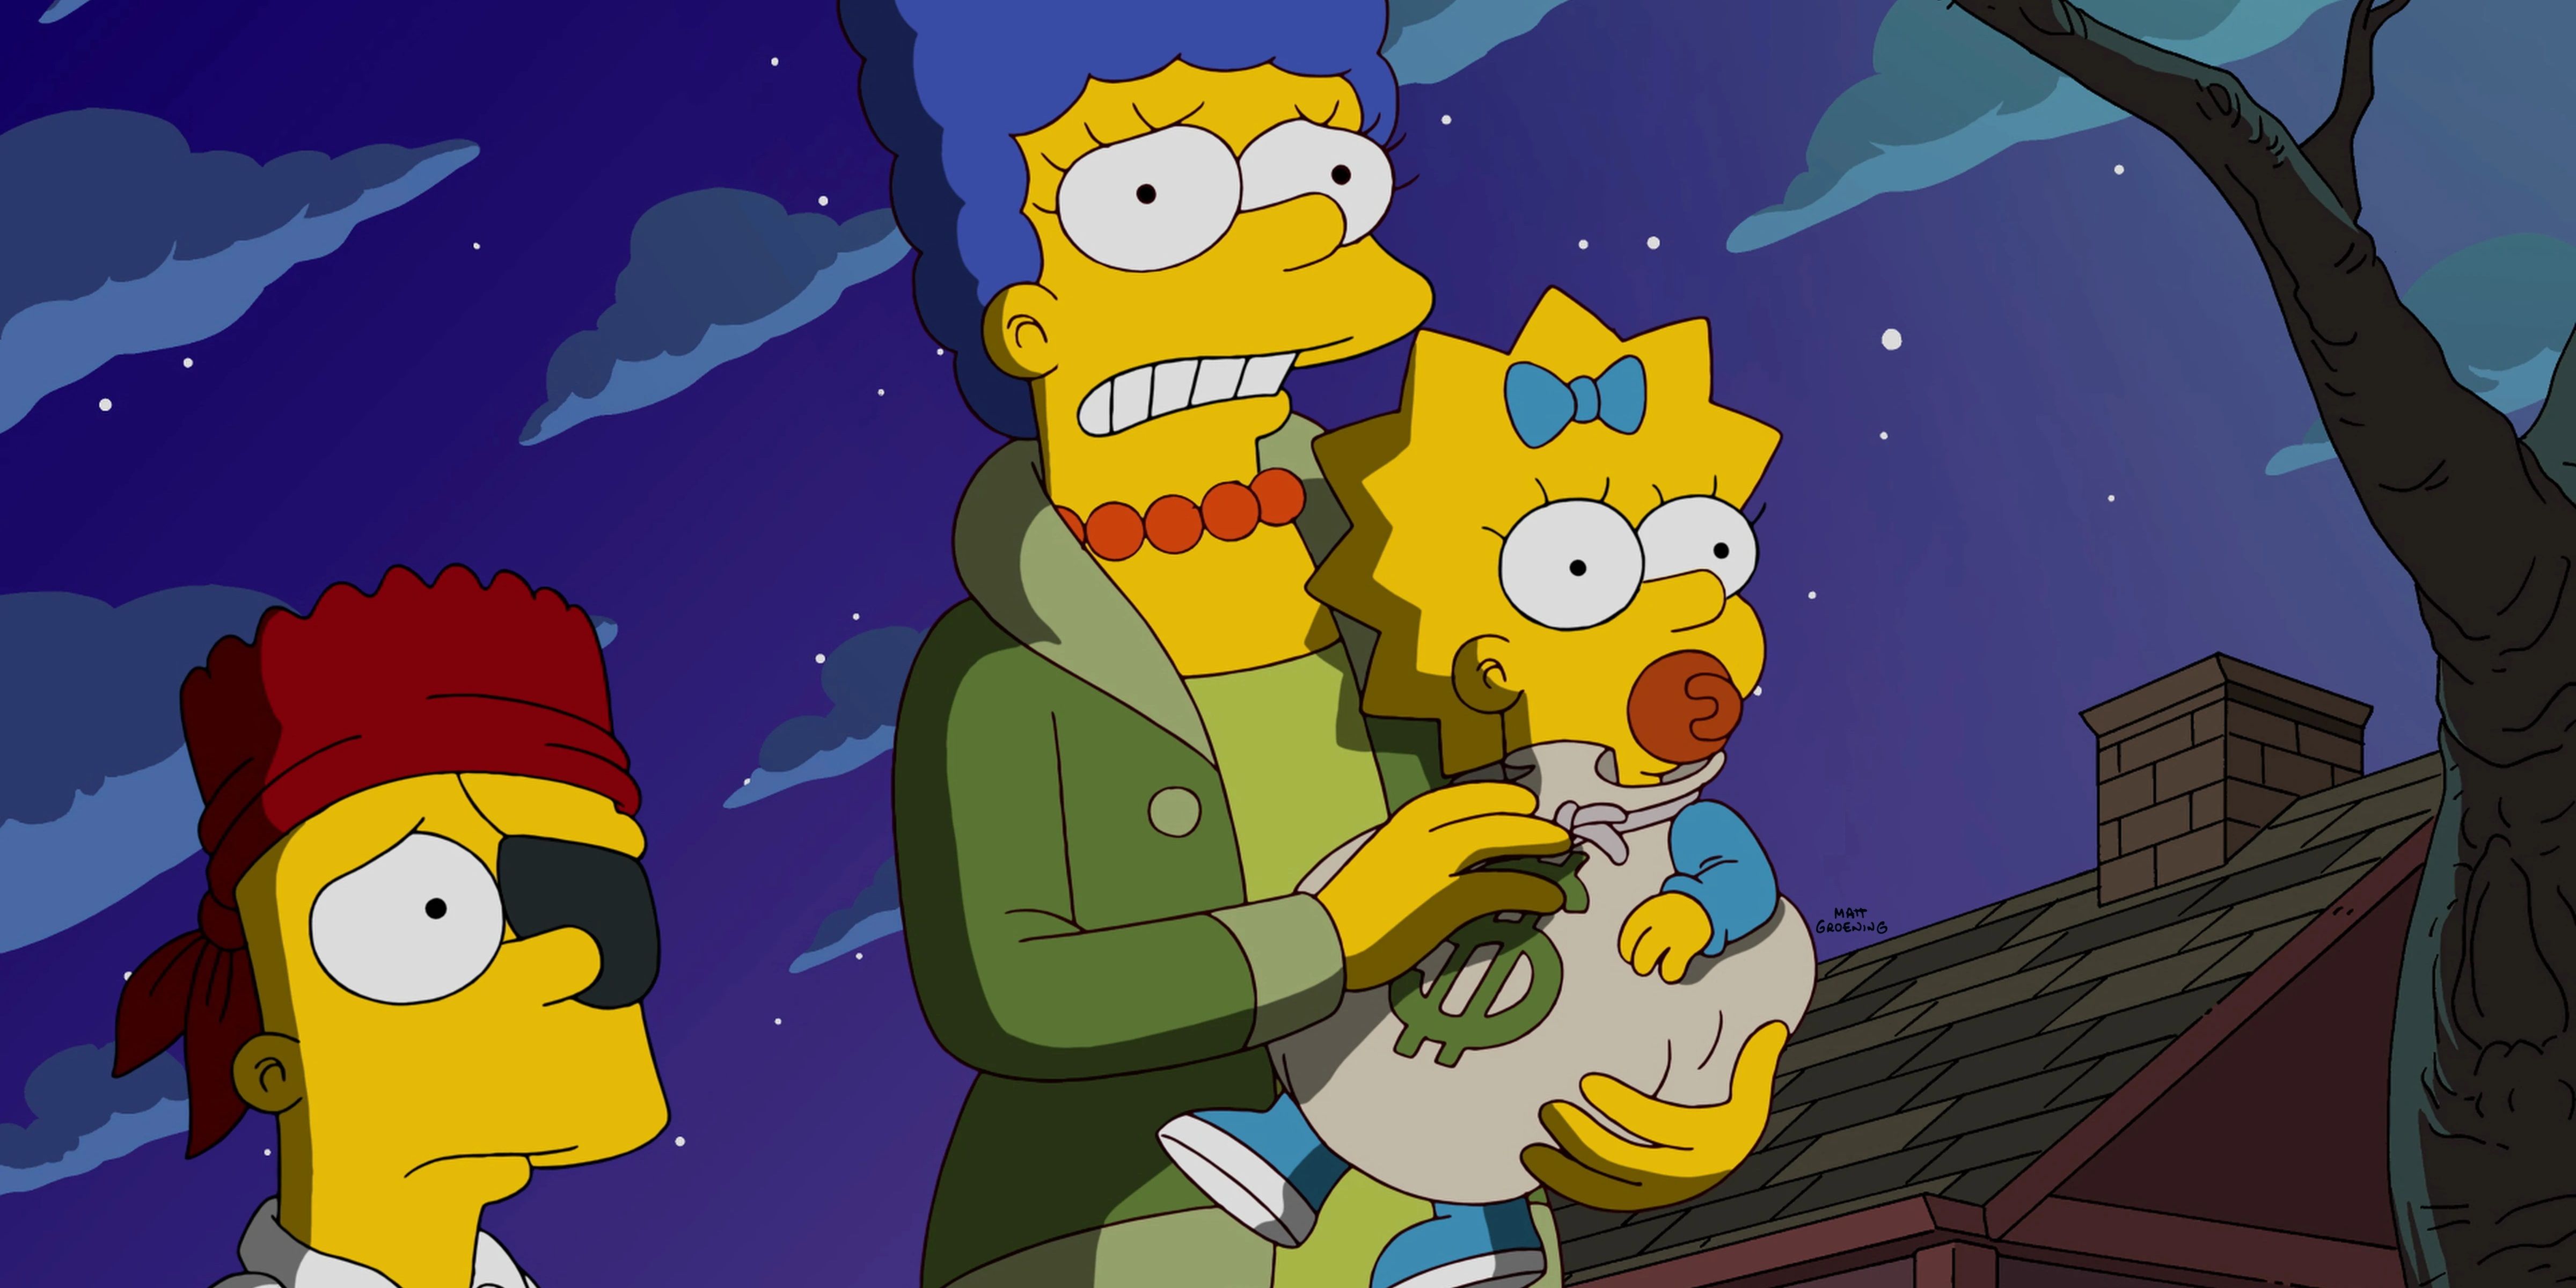 Simpsons' Treehouse of Horror Makes Reference to Outer Wilds - IGN